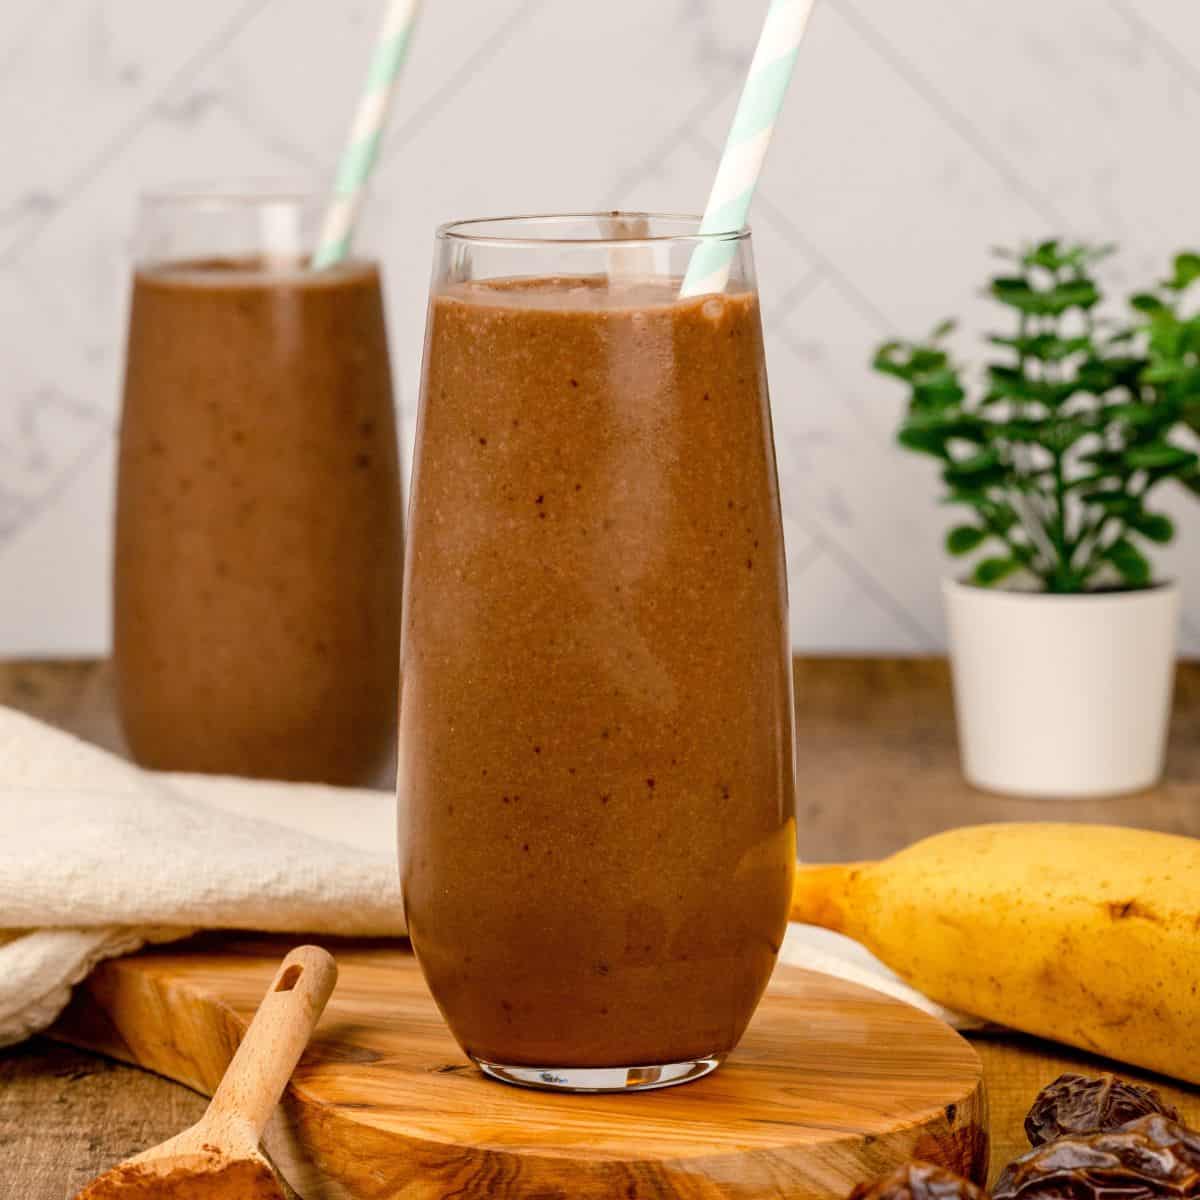 two tall glasses are filled with a chocolate dairy free weight gain shake. there are blue and white straws in each glass. they are sitting on a wood table top surrounded by cocoa powder, bananas, and more fresh dates.